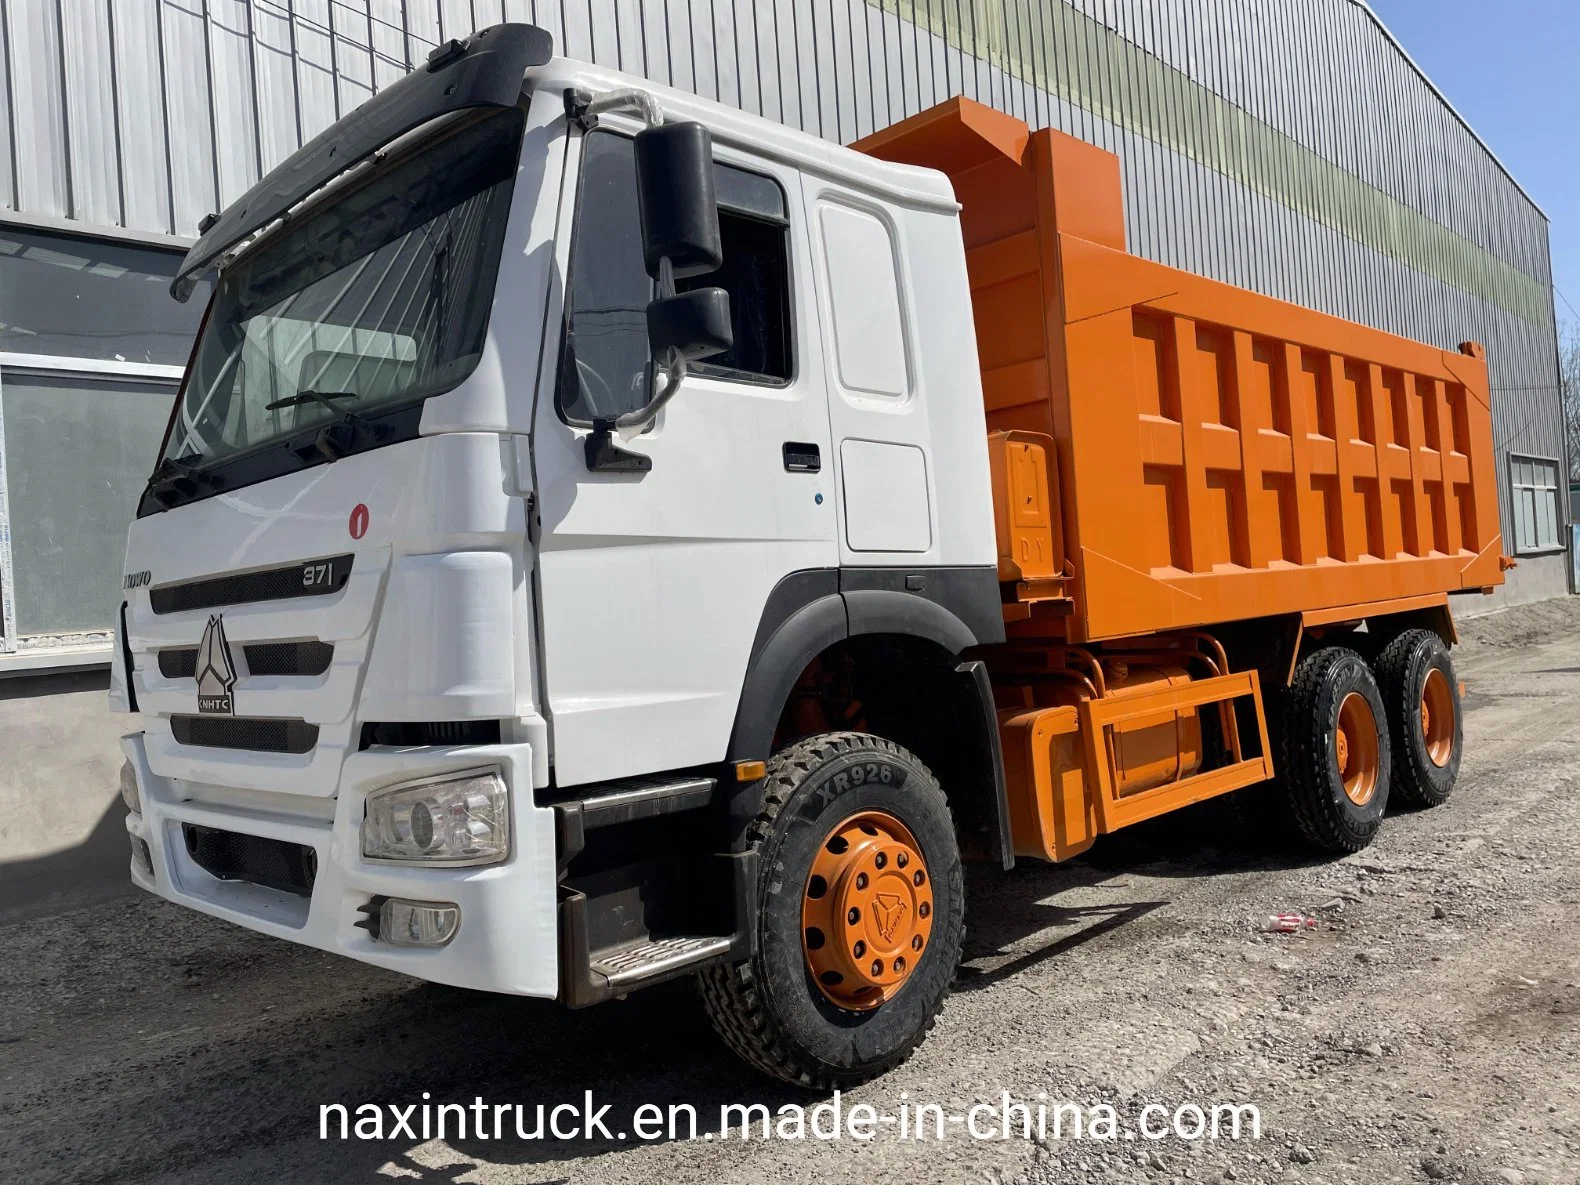 Hot Sales Chinese Supplier Used HOWO 10 Wheels Used Sinotruk Dump Truck LHD and Rhd 6X4 30 Ton